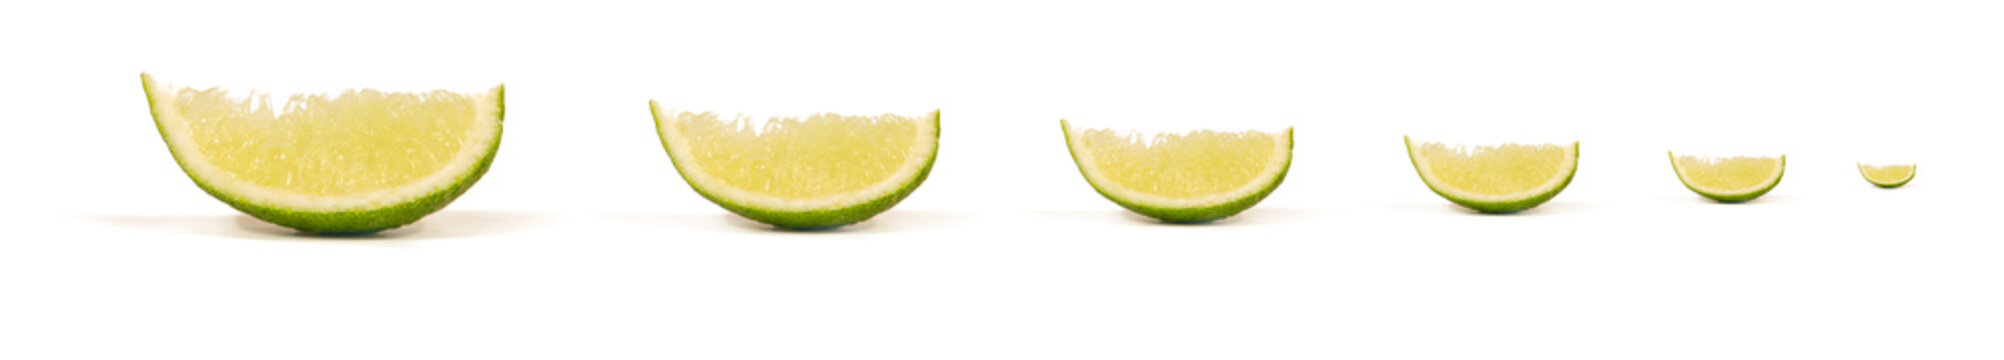 Bright and Fresh Lime Slices in a Panoramic Image